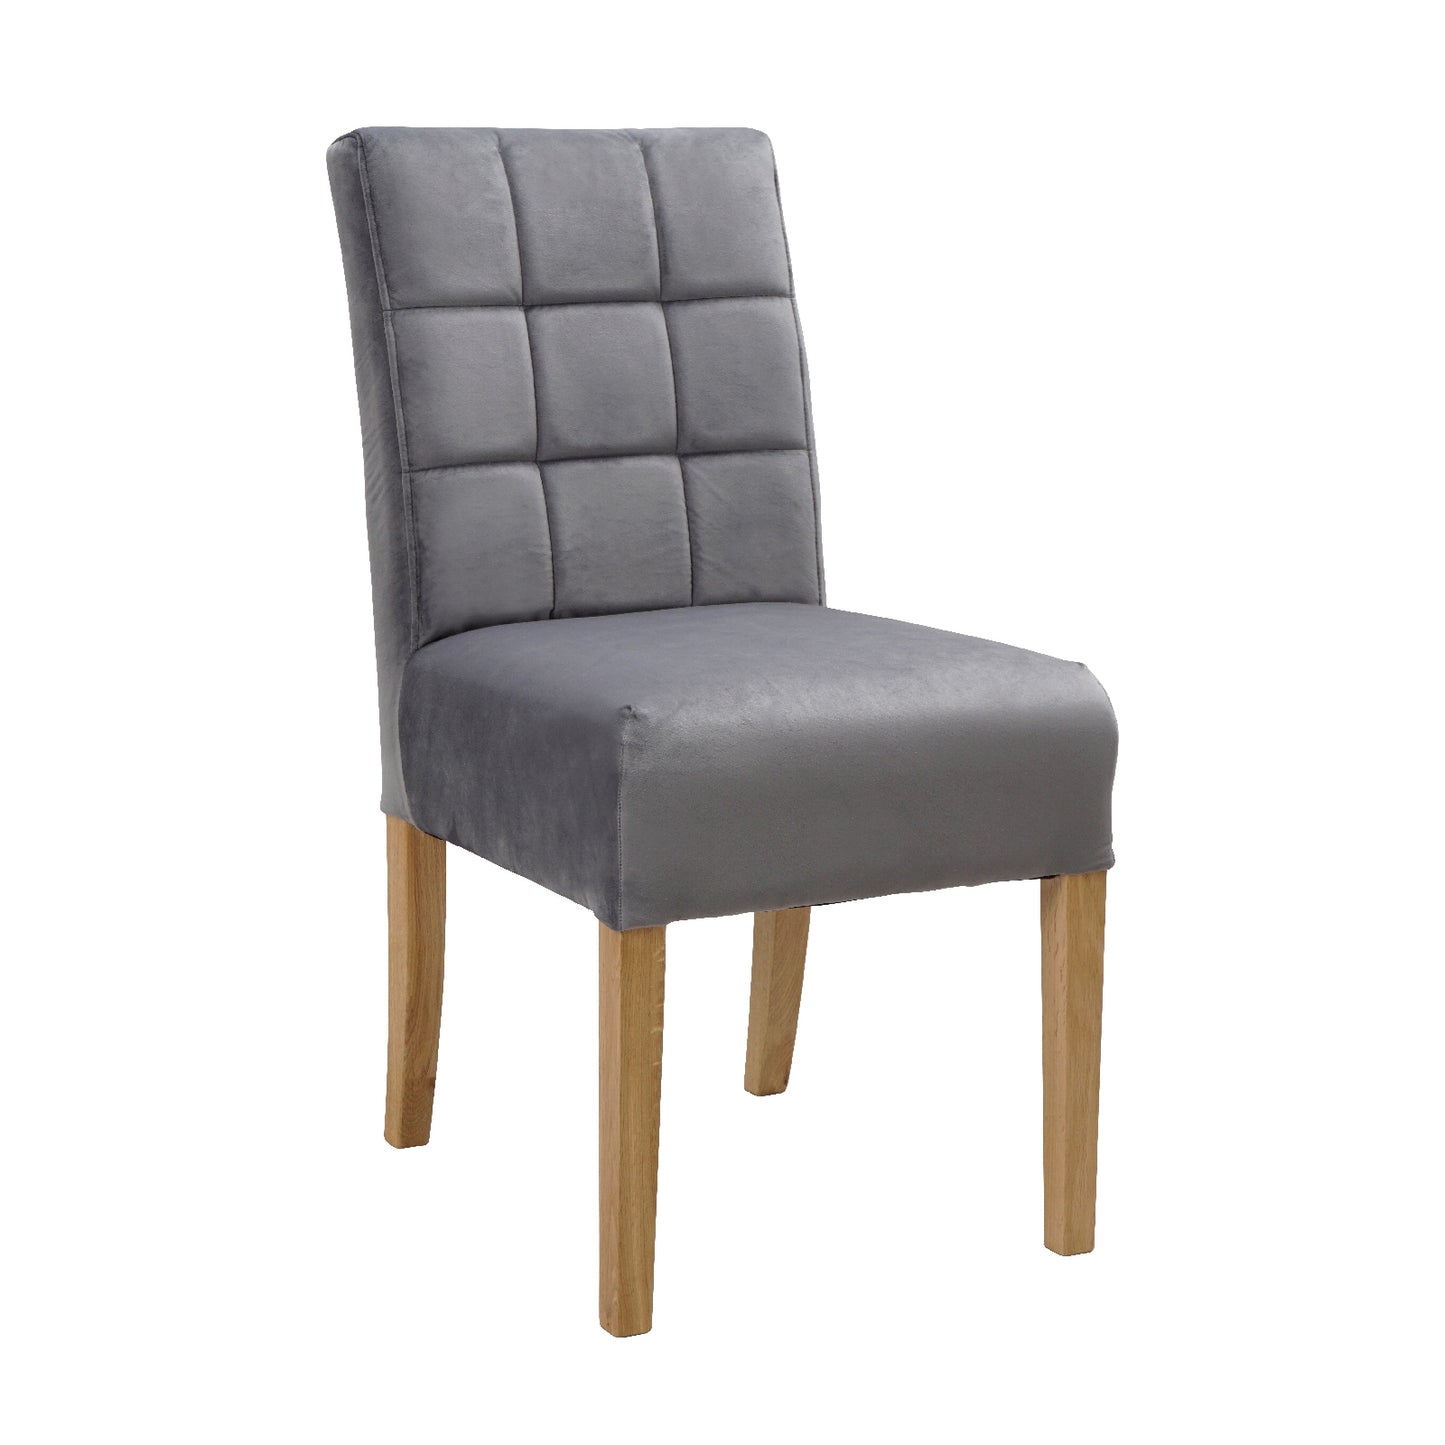 PLUSH DINING CHAIR BUY ONE GET ONE FREE